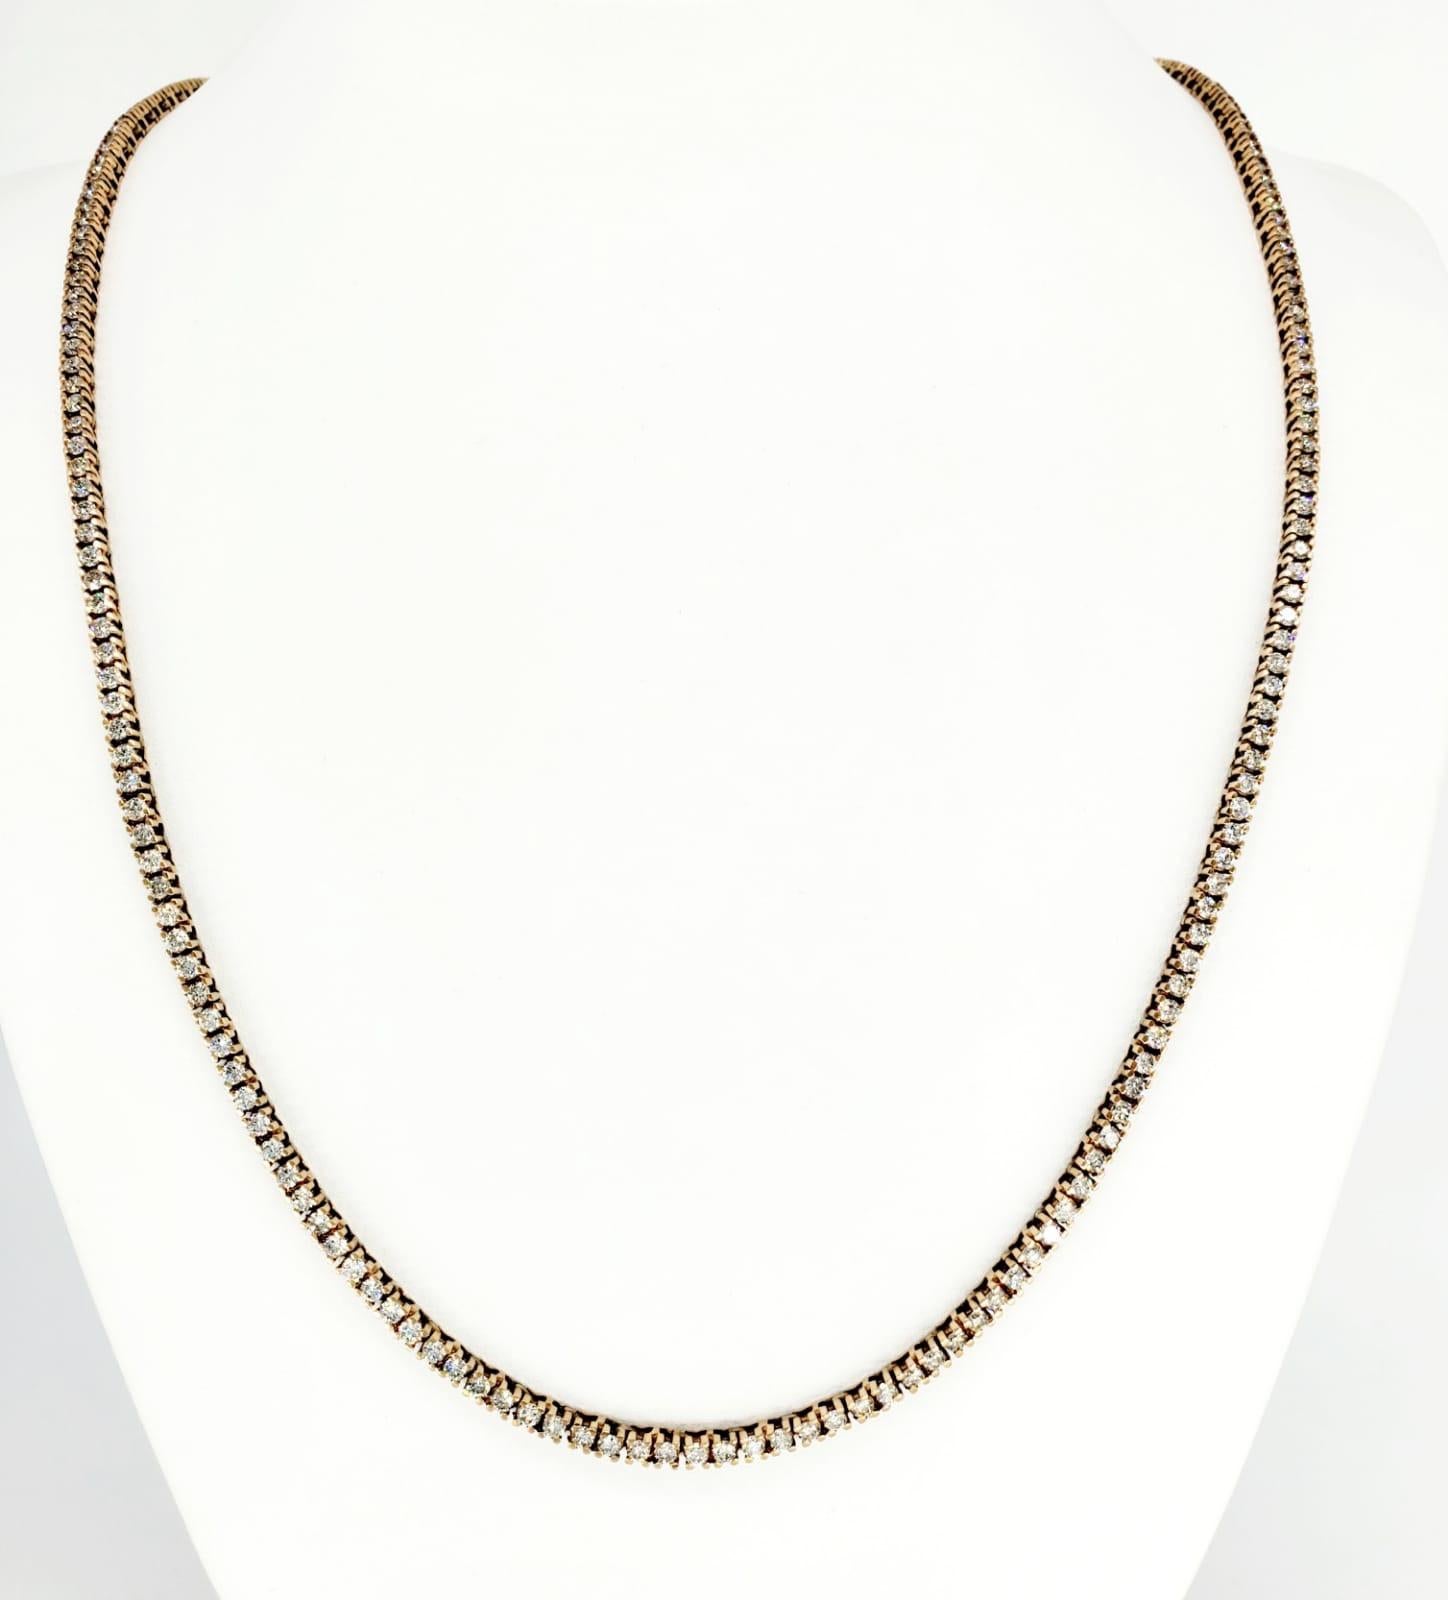 27 inch necklace